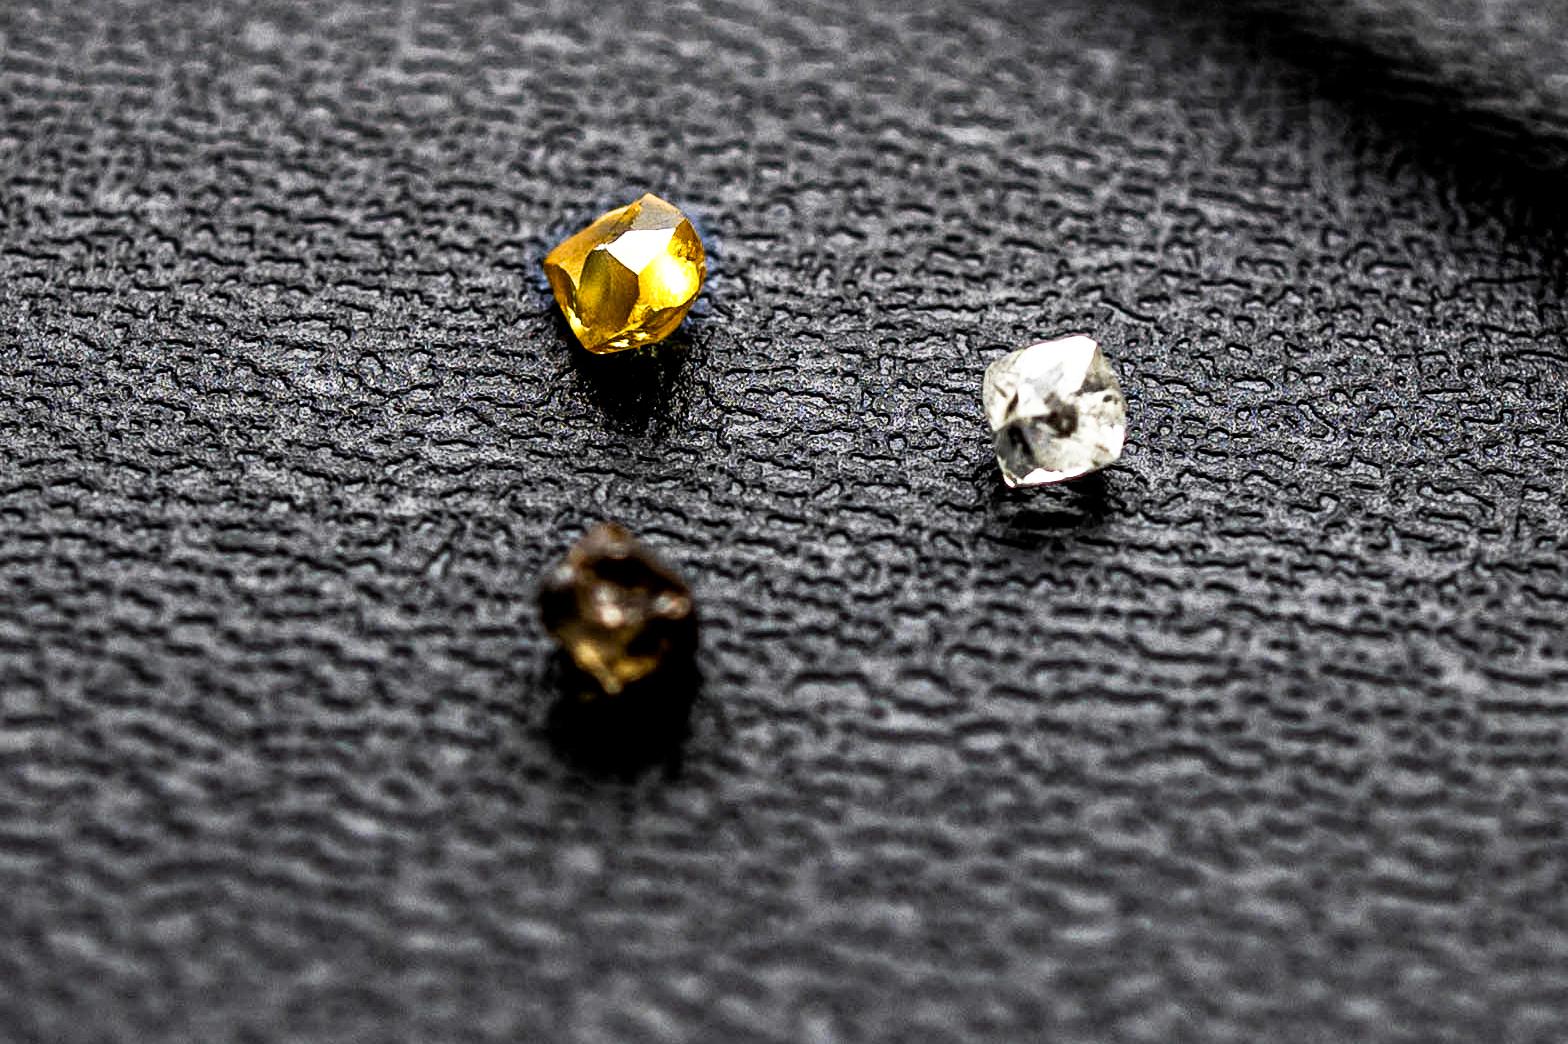 Superdeep diamonds from West Africa and Brazil unveil critical insights on earth’s evolution 💎